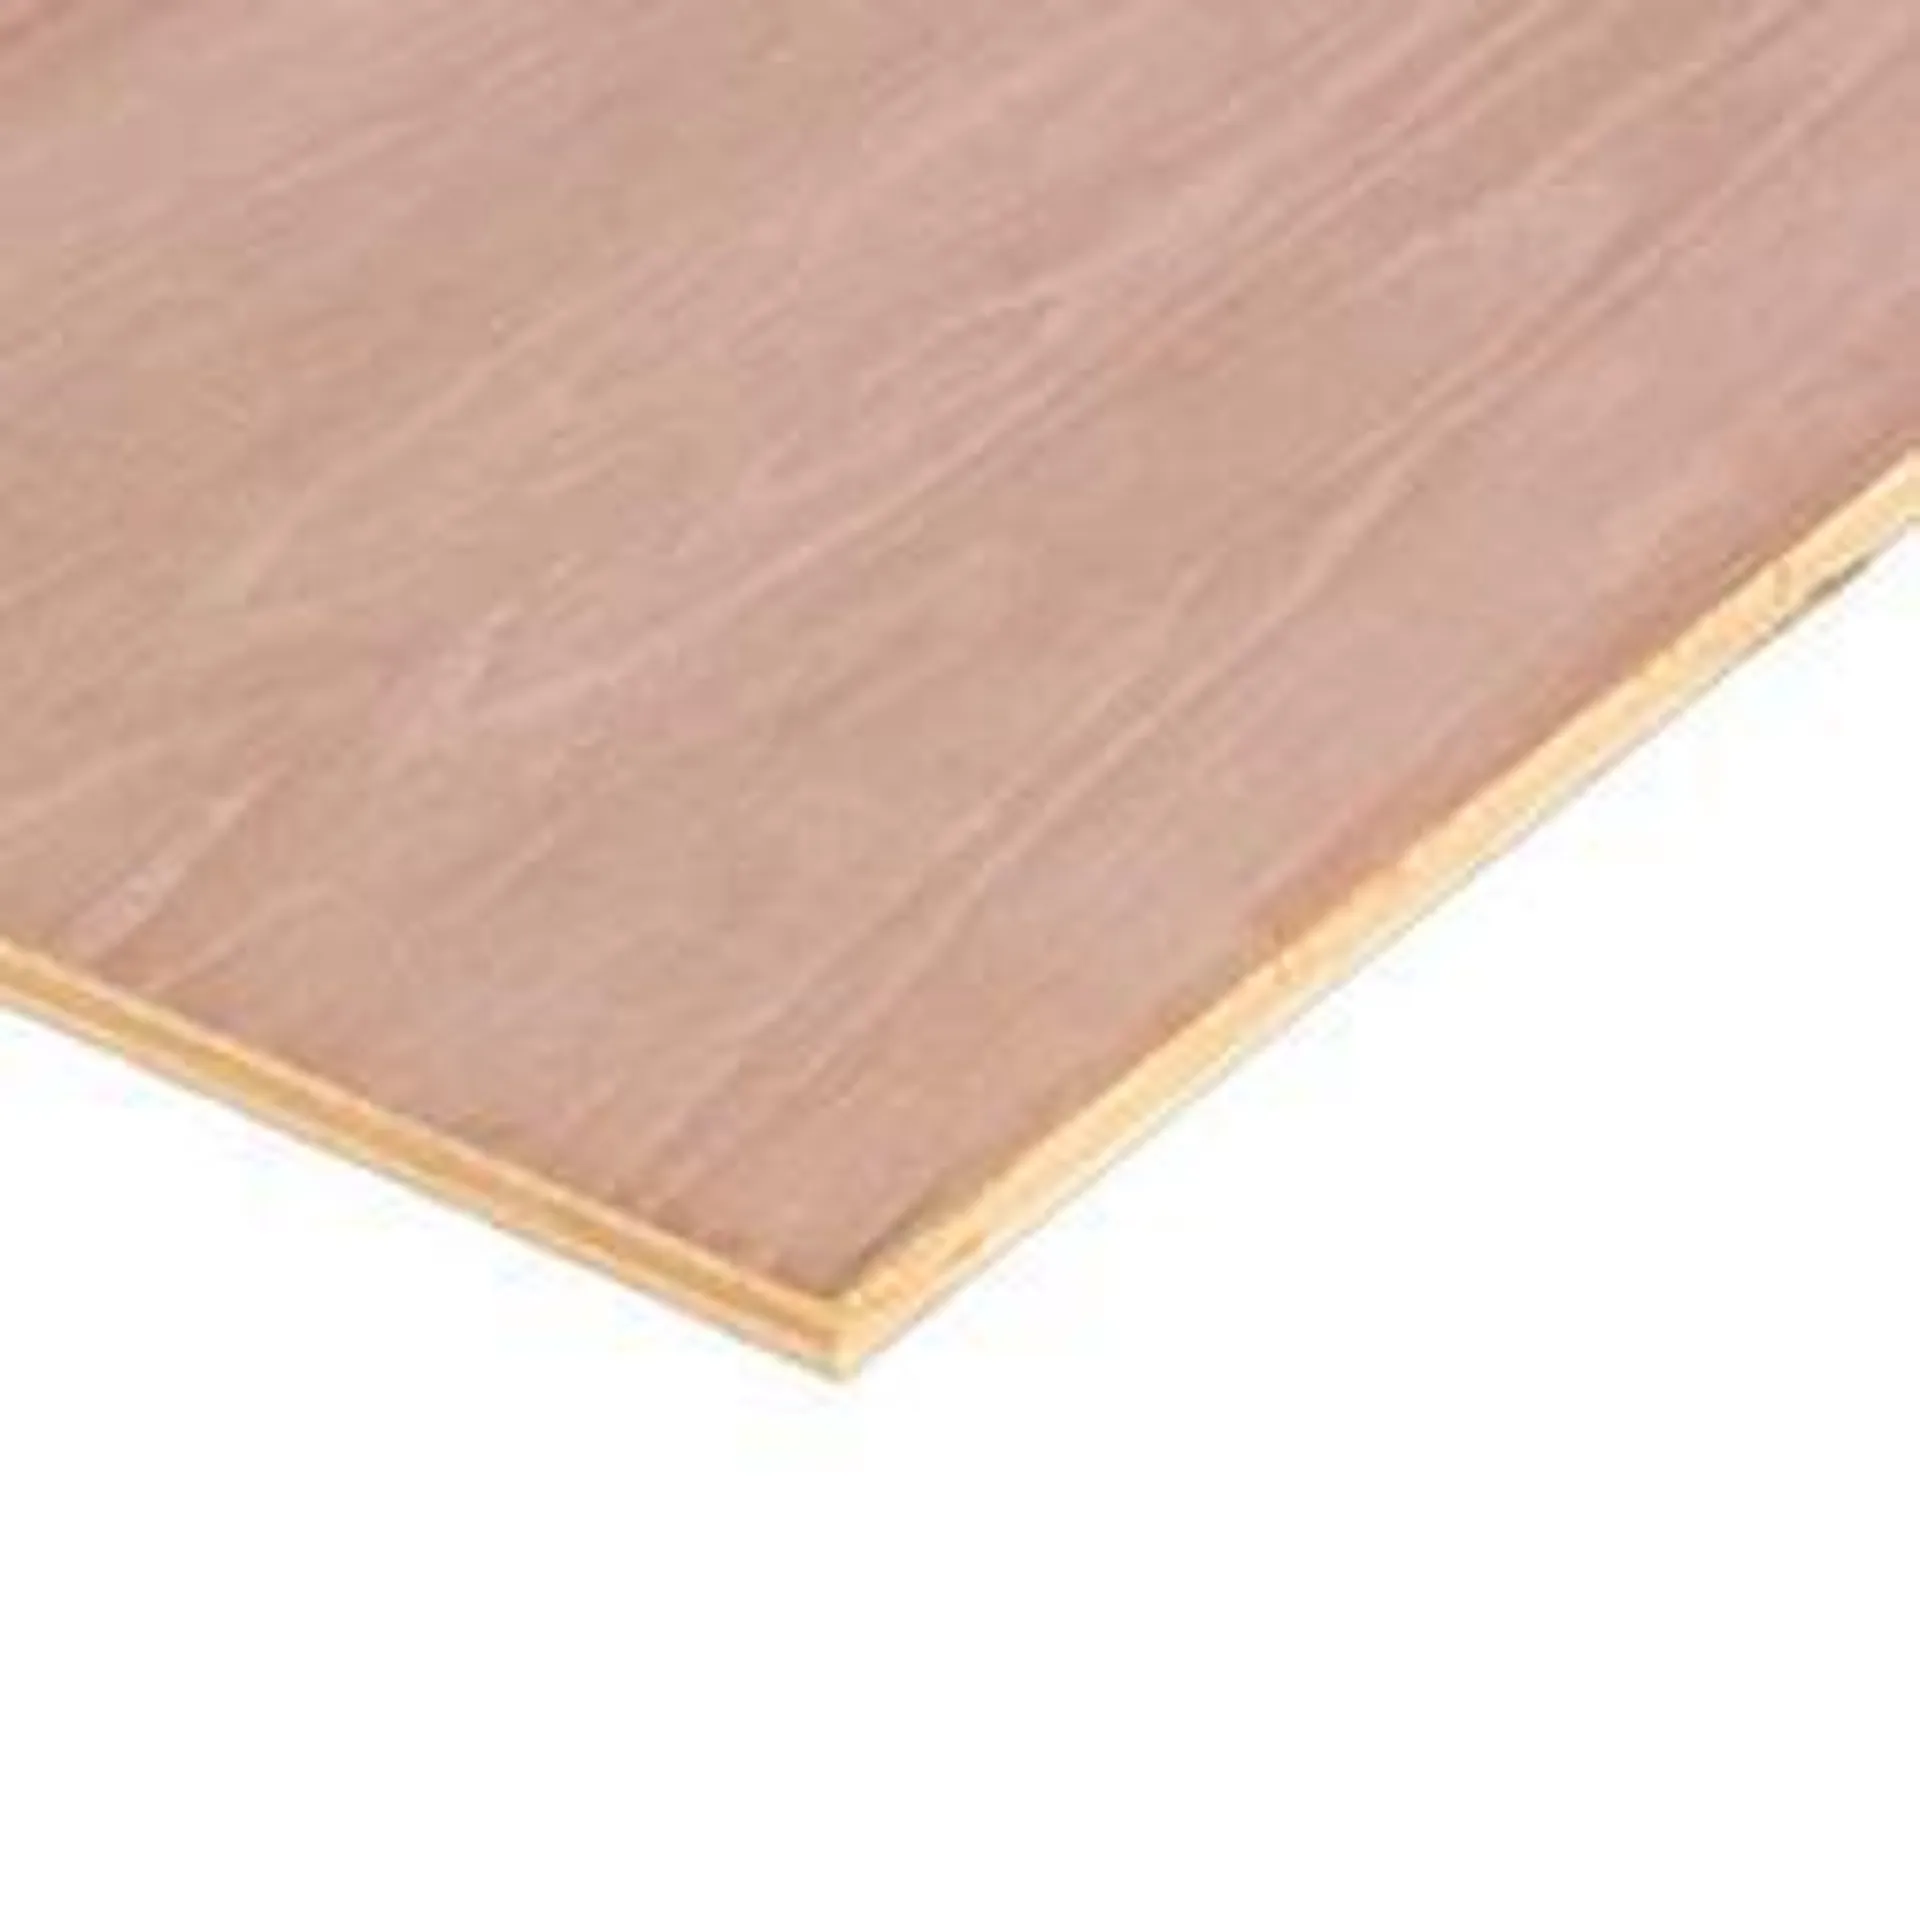 B-2 Plywood, 3/4 in x 4 ft x 8 ft - Red Oak